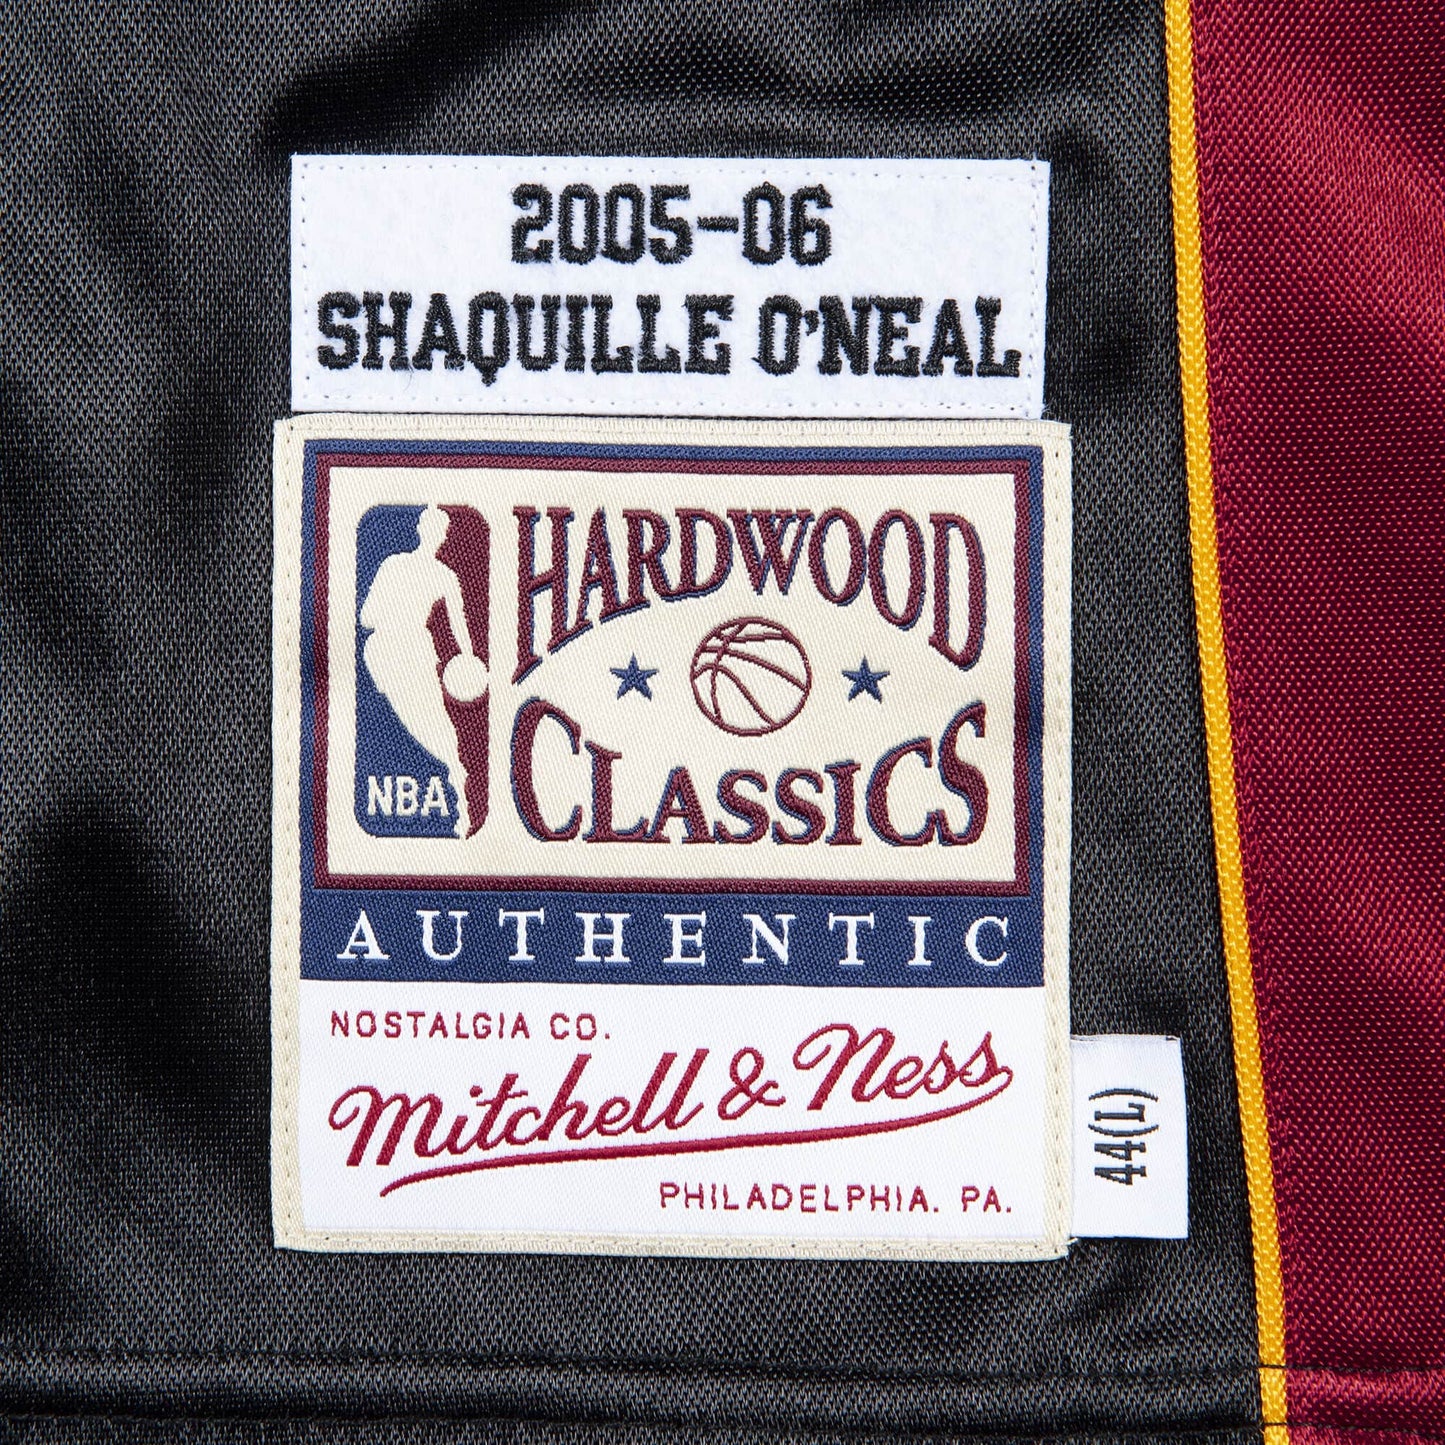 NBA Authentic Jersey Miami Heat Road Finals 2005-06 Shaquille O'Neal #32